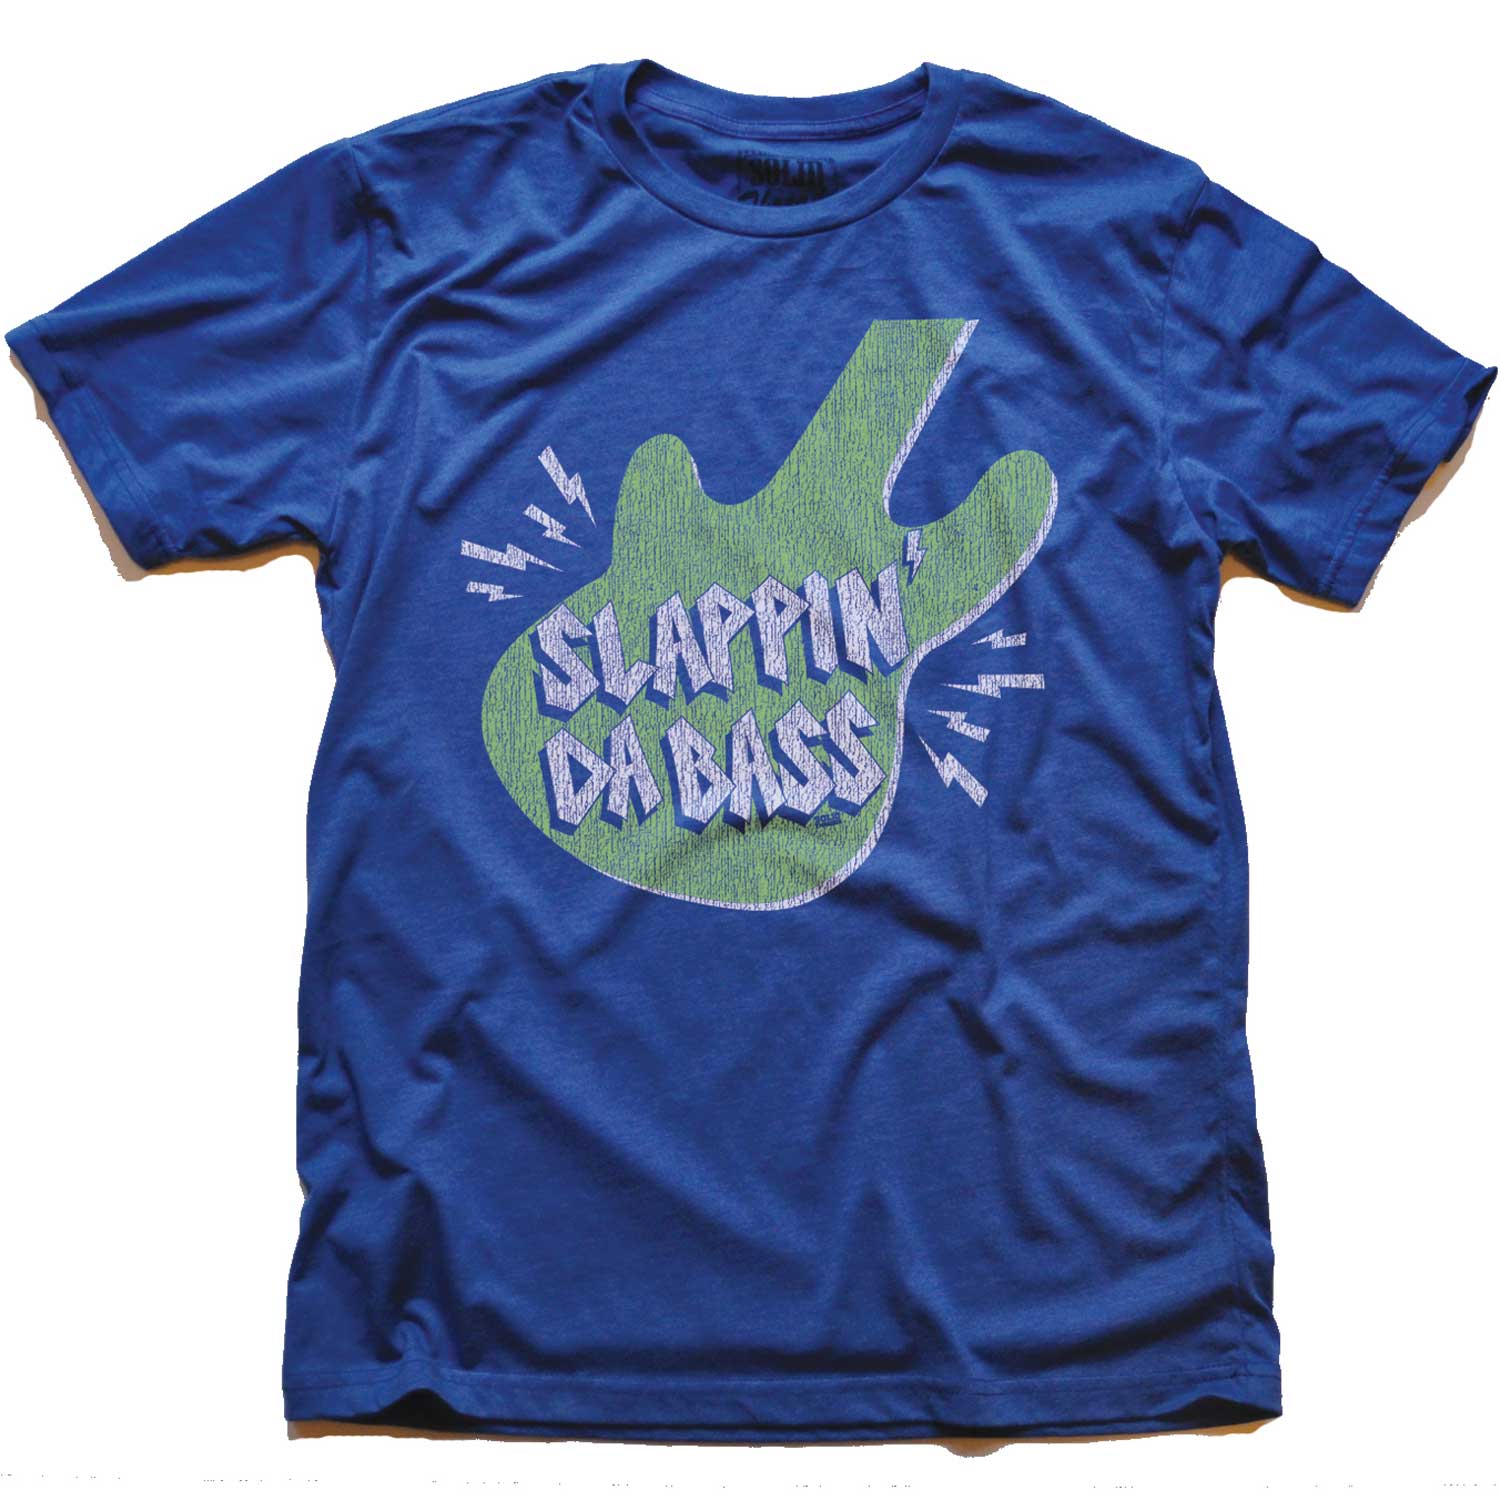 All About That Bass Vintage Graphic T-Shirt